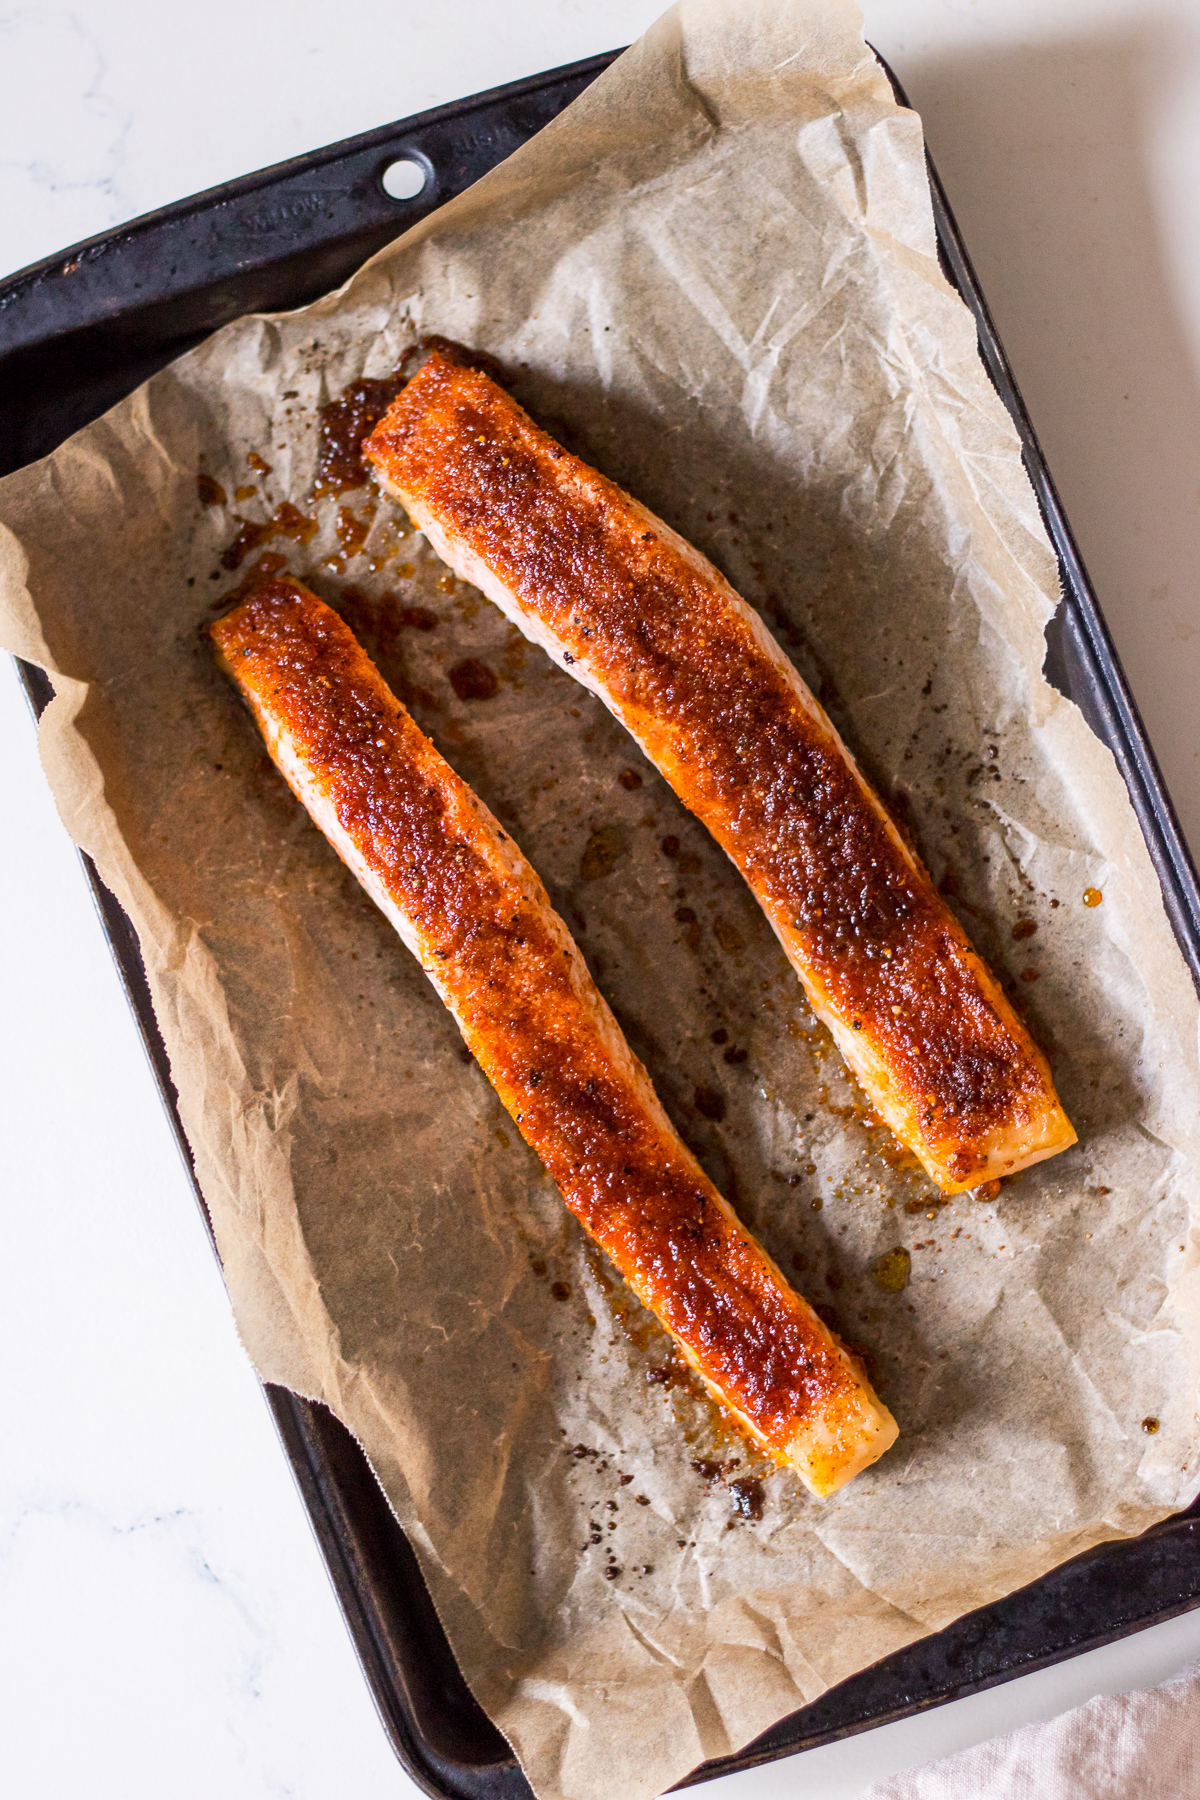 Image of brown sugar baked salmon fillets on a metal baking tray